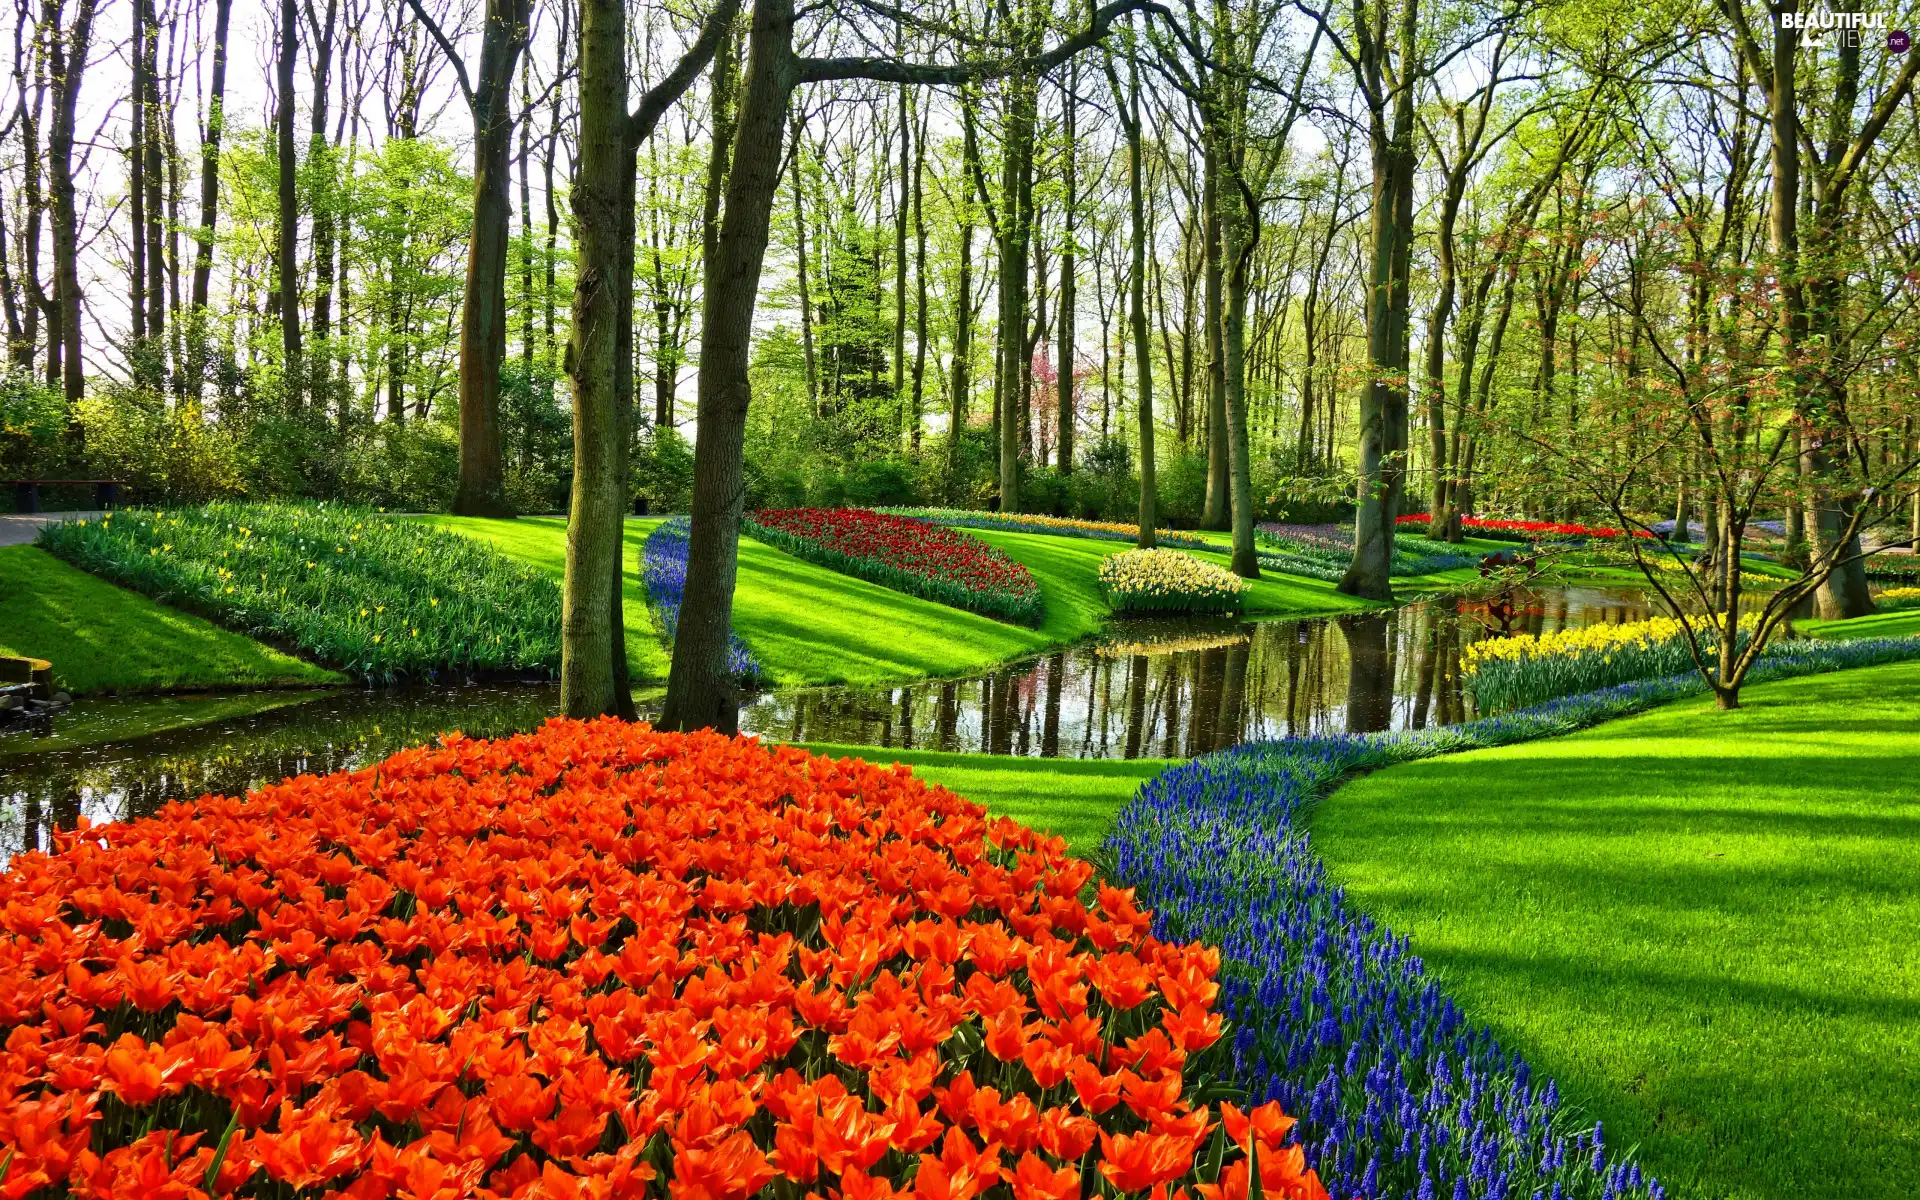 flux, rebates, Flowers, viewes, Tulips, Park, color, Spring, trees, Muscari